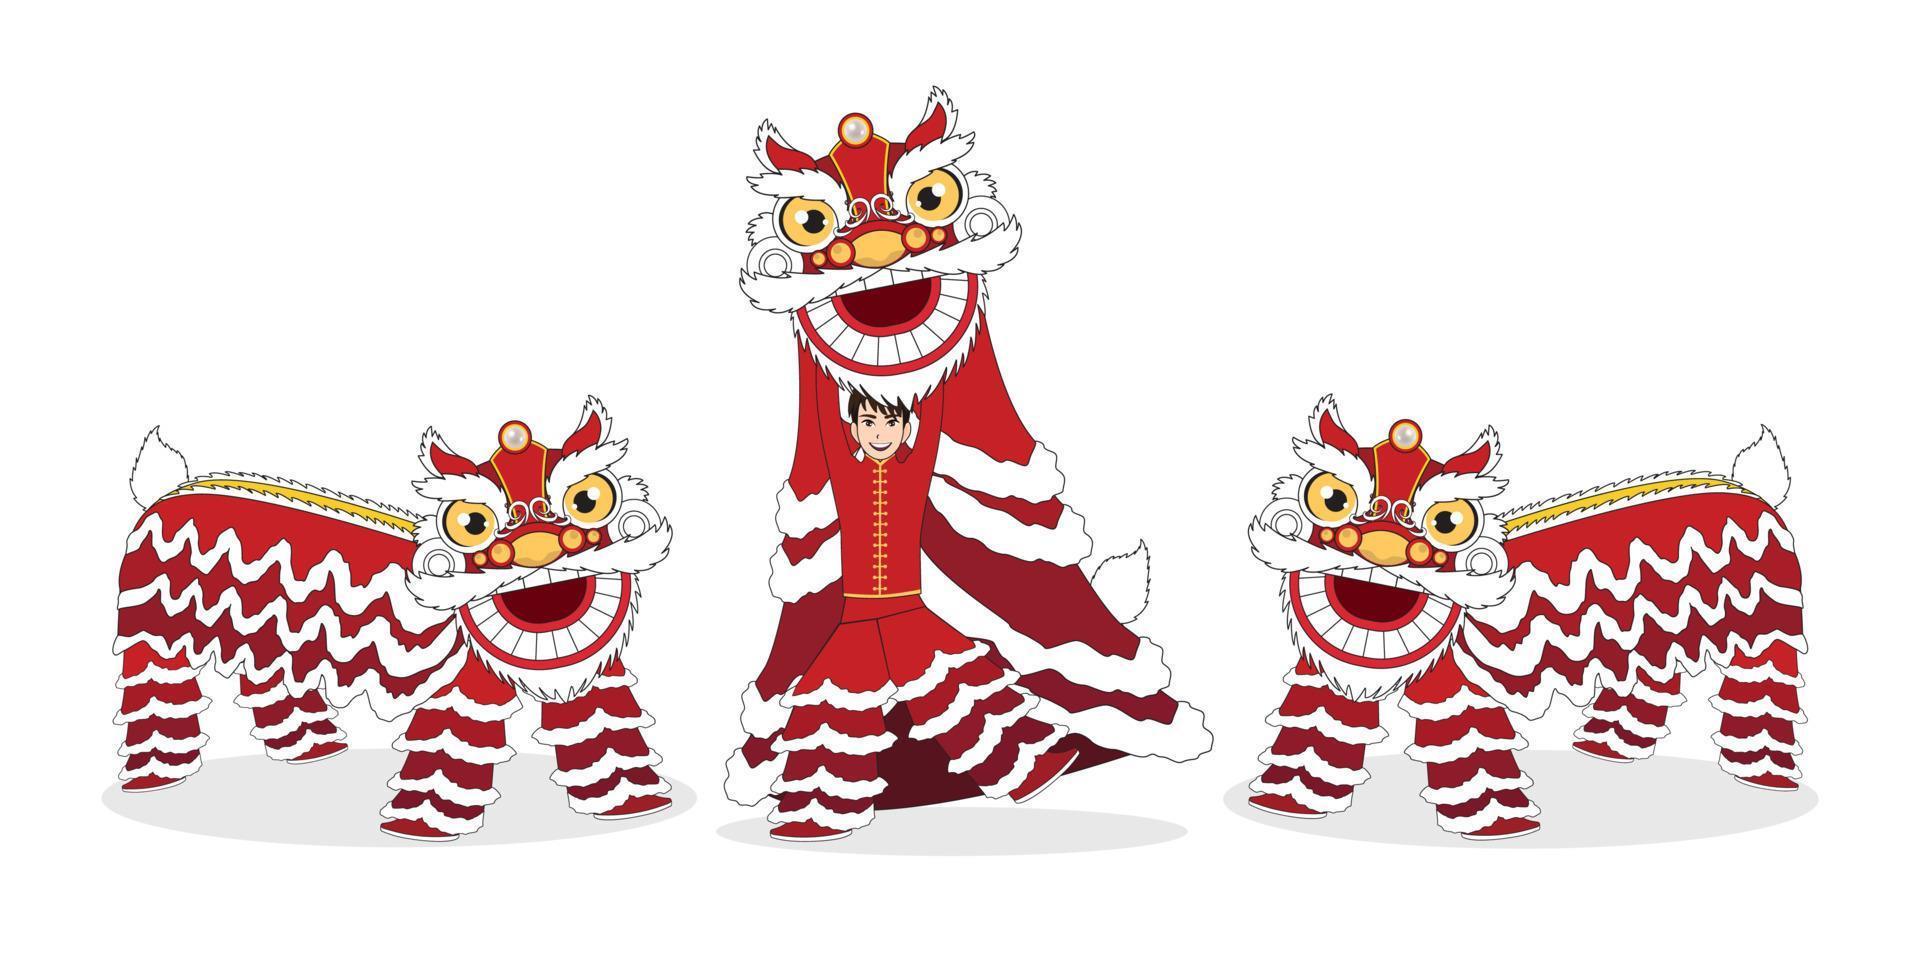 Chinese Lunar New Year Lion Dance Fight isolated with cartoon character design on white background vector